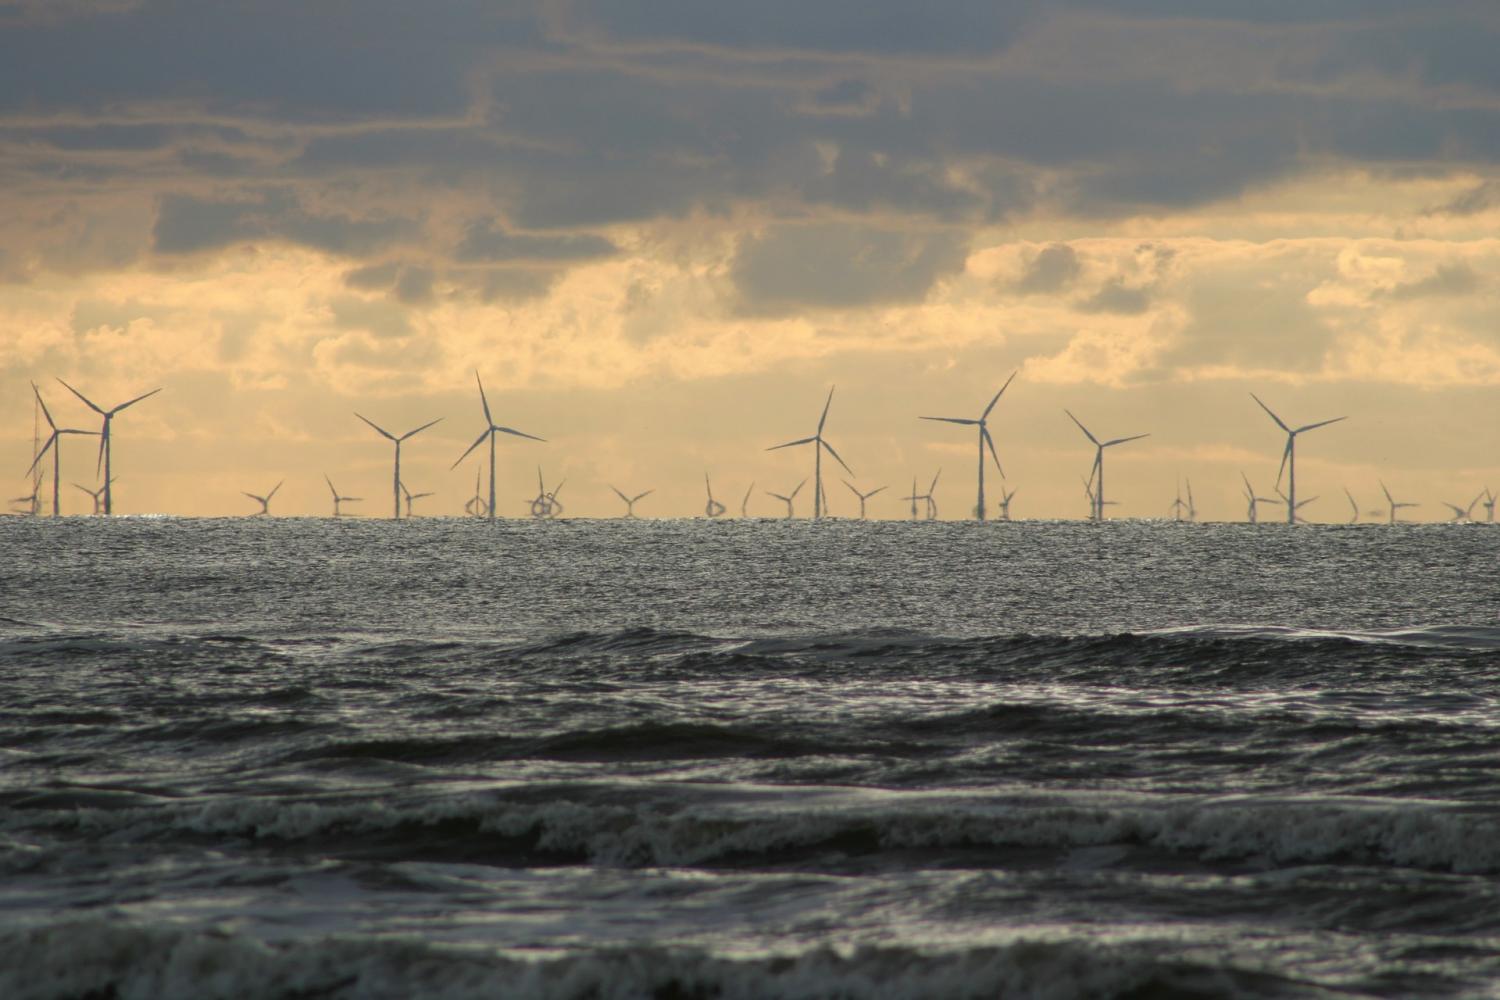 #Study finds offshore wind could drive down energy costs in New England